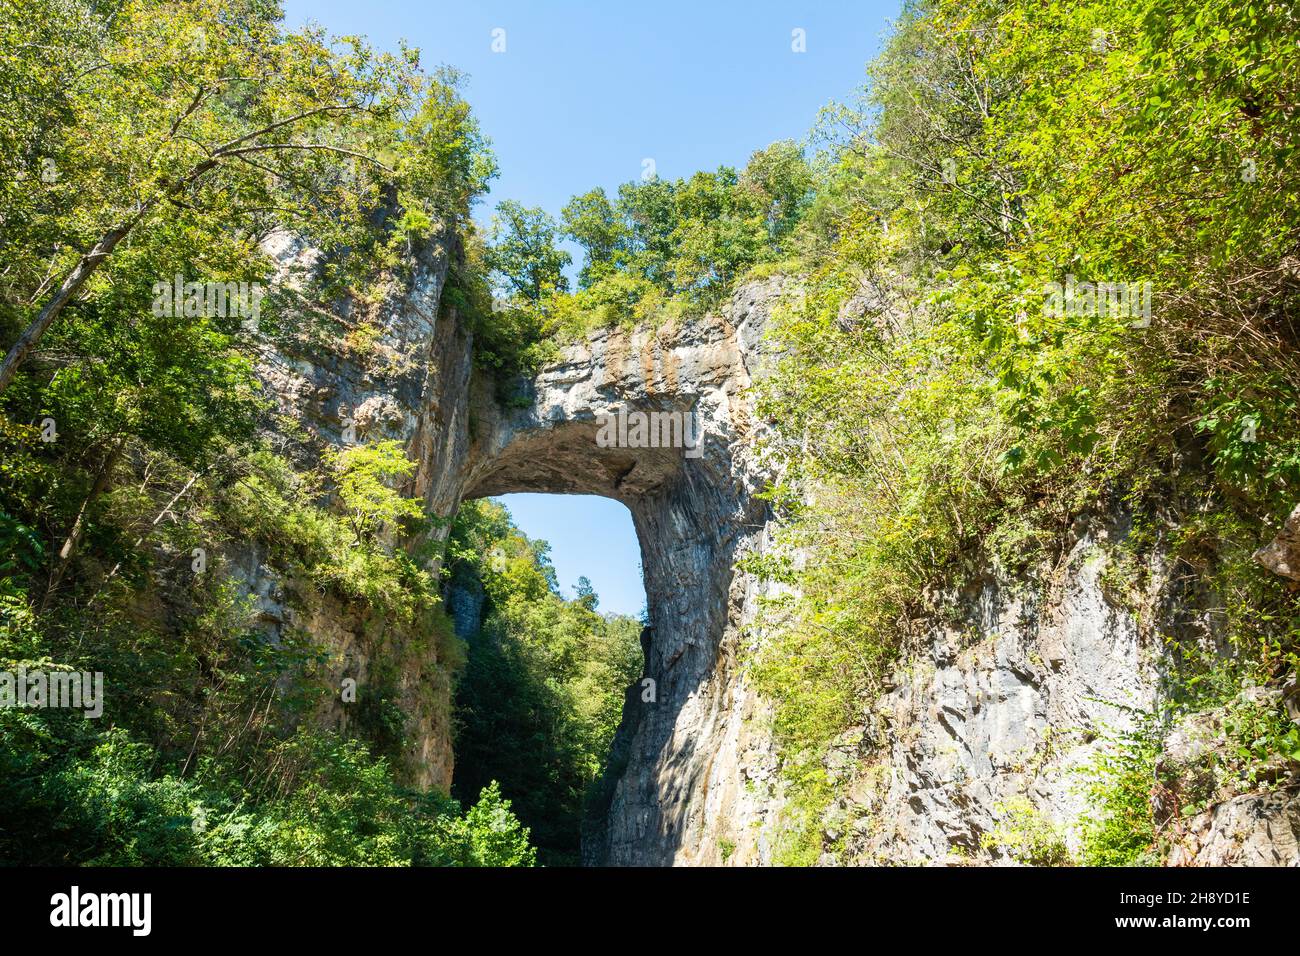 Natural Bridge geological formation in Rockbridge County, Virginia, comprising a 215-foot-high (66 m) natural arch with a span of 90 feet (27 m). It i Stock Photo